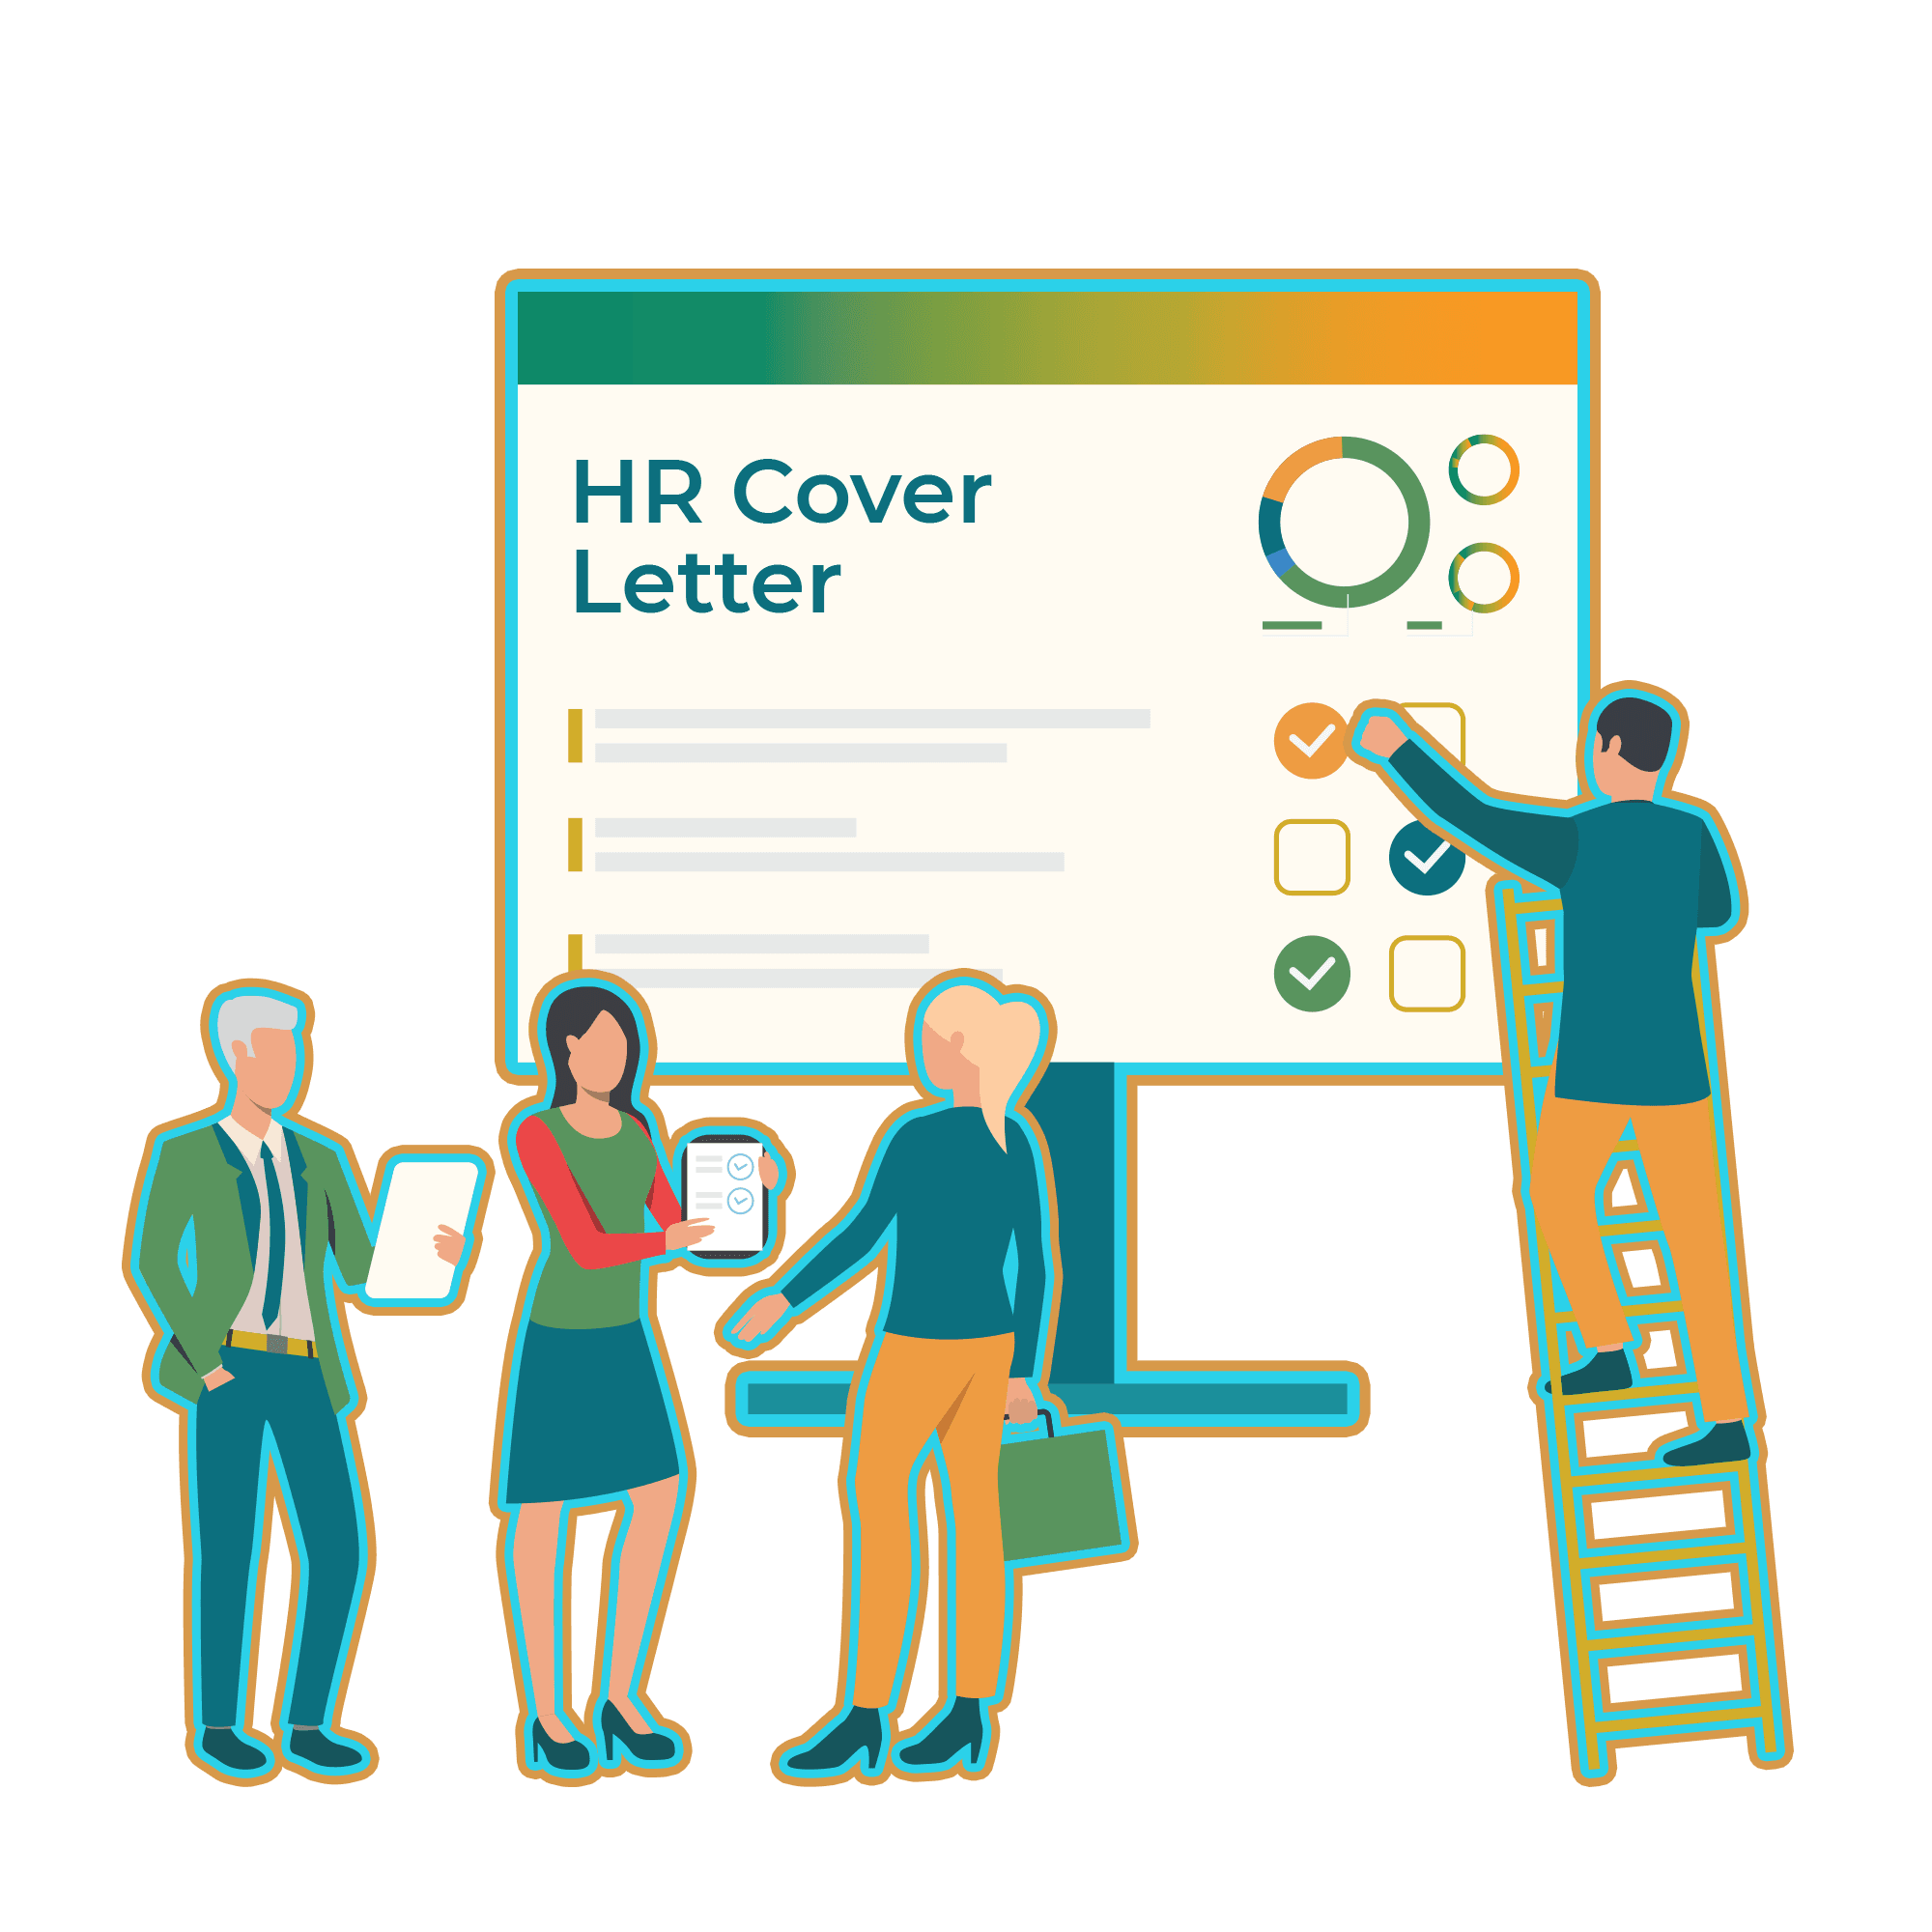 Human Resources (HR) Cover Letter: Examples, Templates, Writing Tips